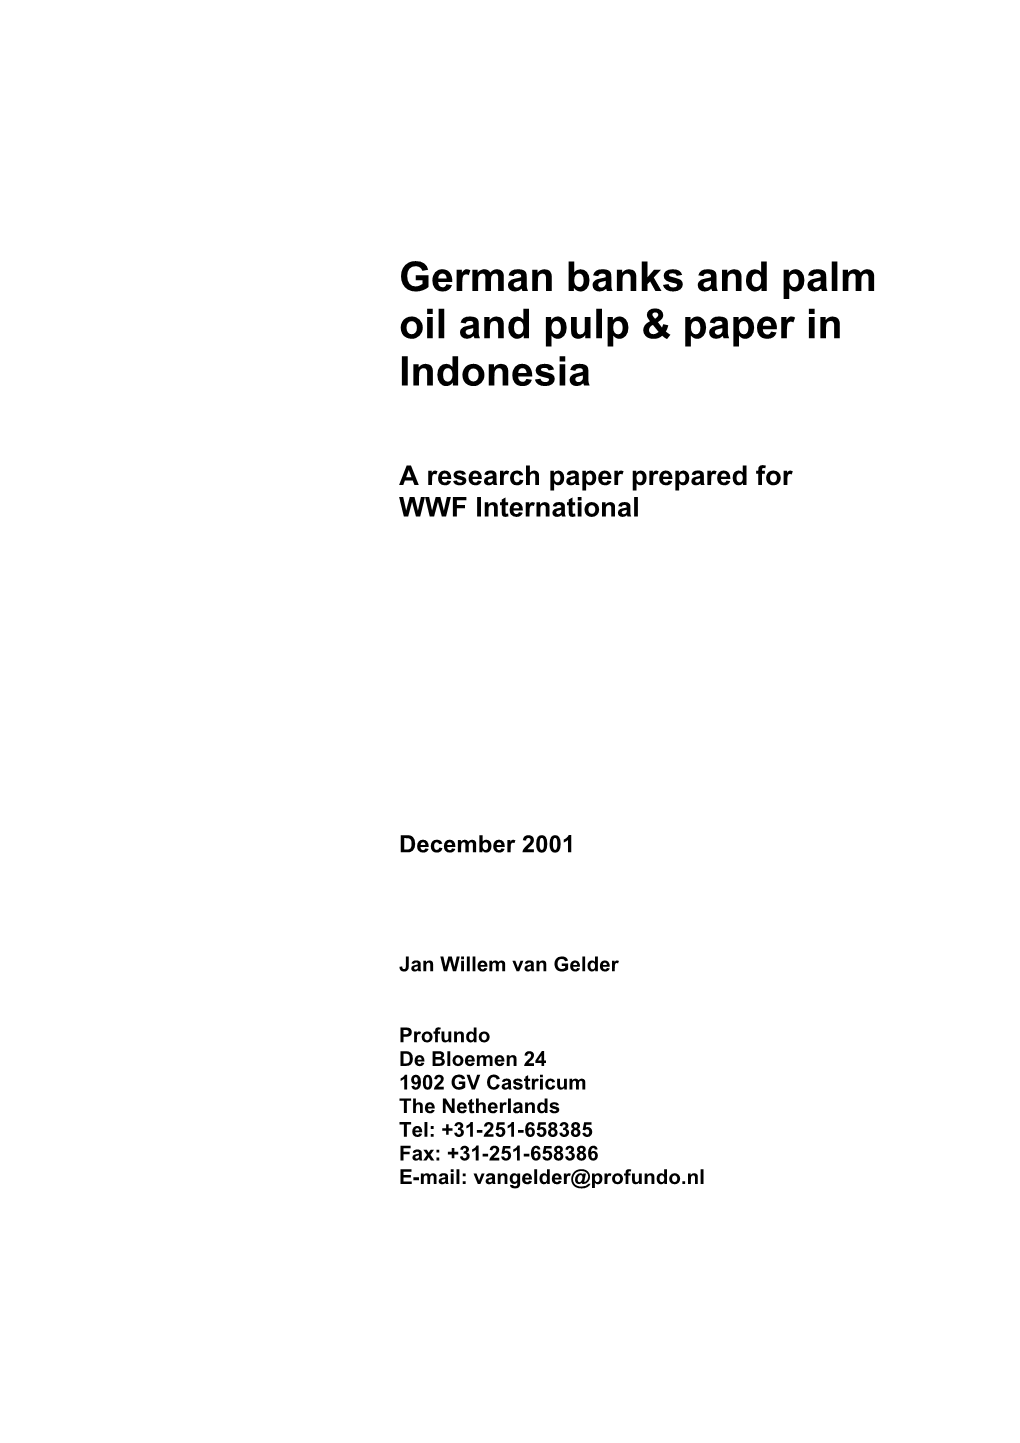 German Banks and Palm Oil and Pulp & Paper in Indonesia